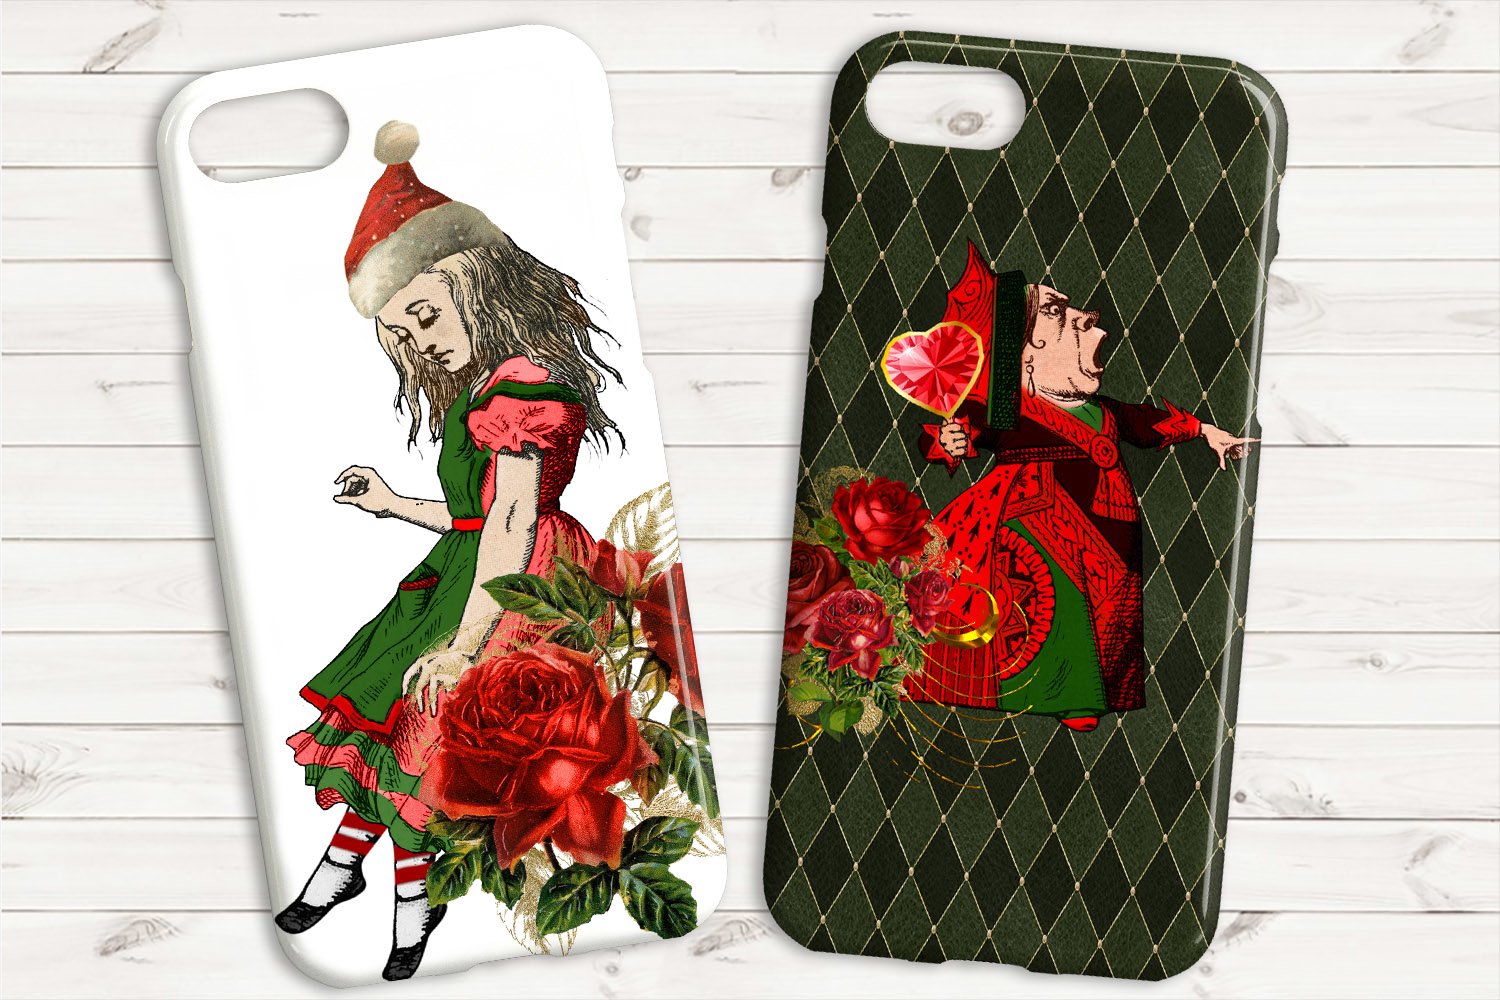 Christmas images on printed phone covers.